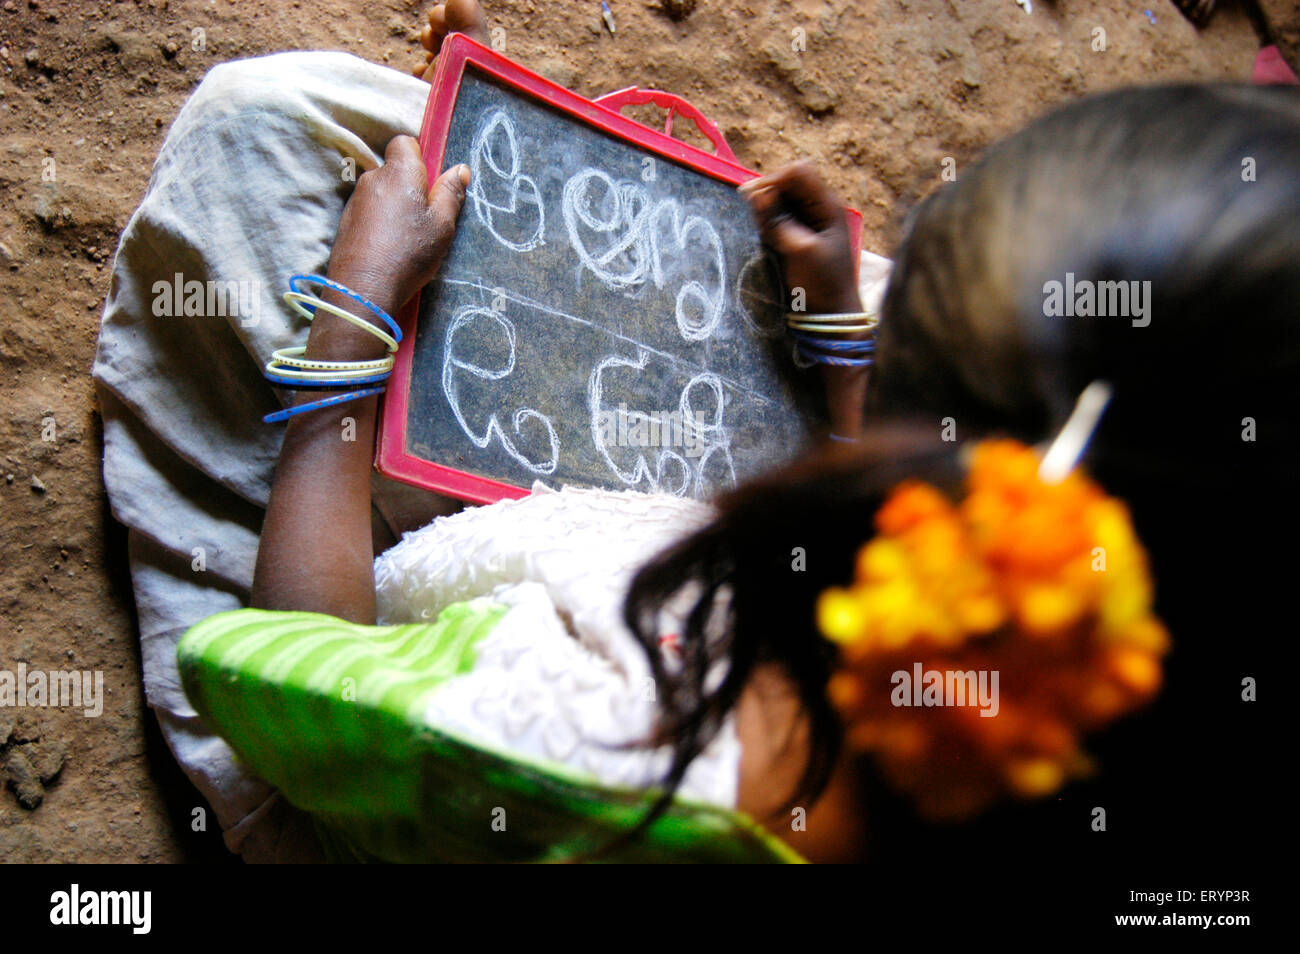 Tribal girl learn Telugu alphabets in school run by NGO Non Government Organization in village at Andhra Pradesh ; India Stock Photo